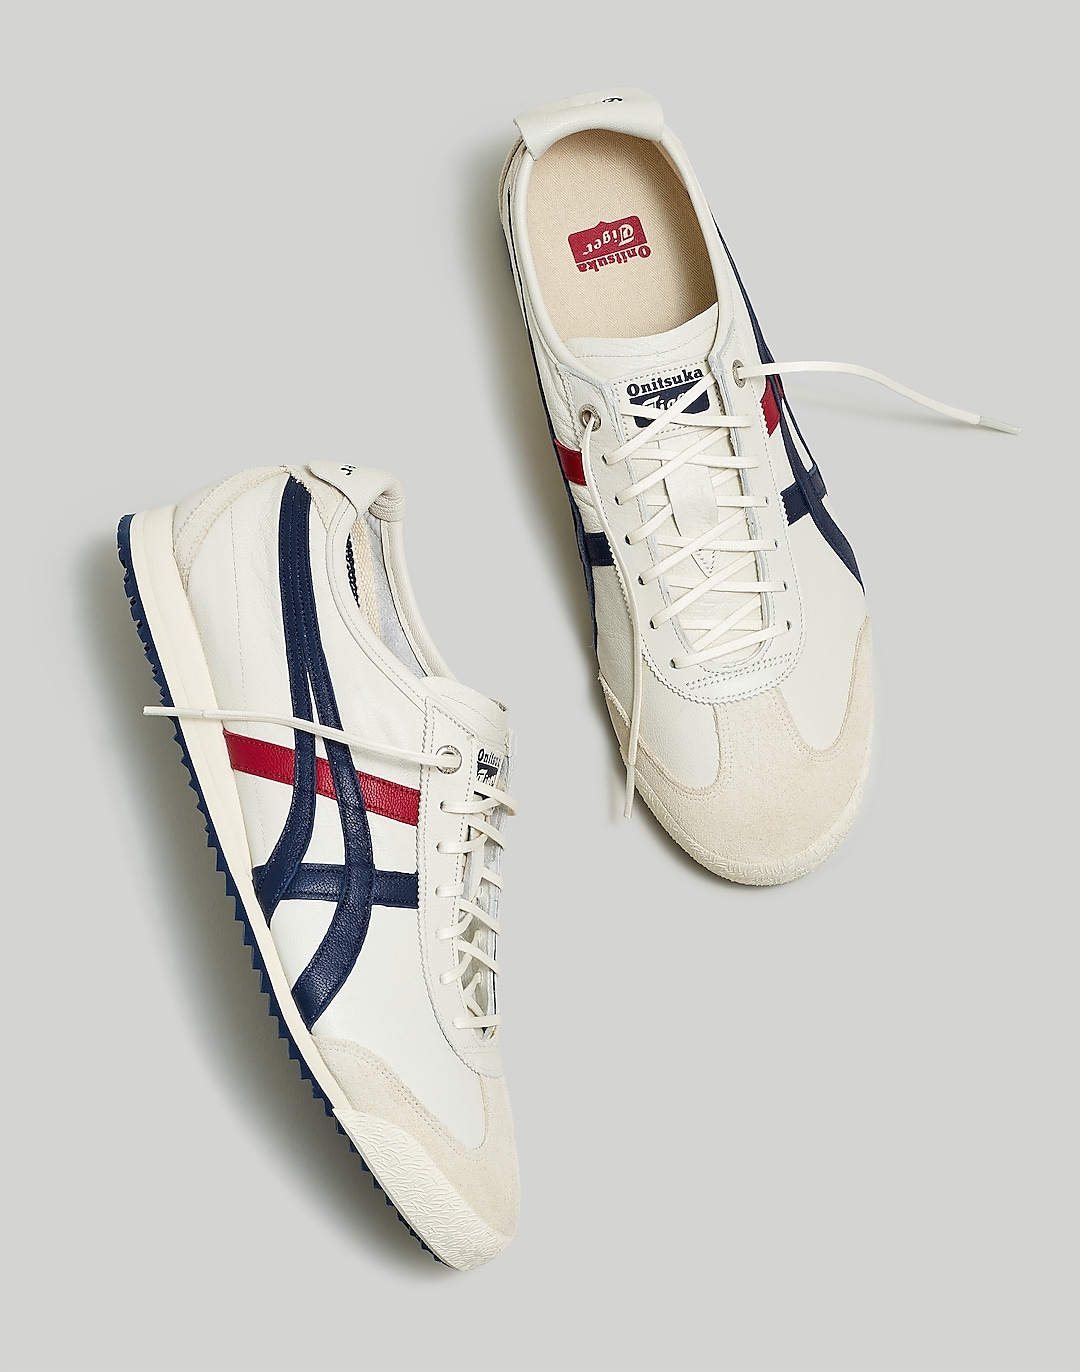 Onitsuka Tiger™ Mexico 66 SD Sneakers | Madewell